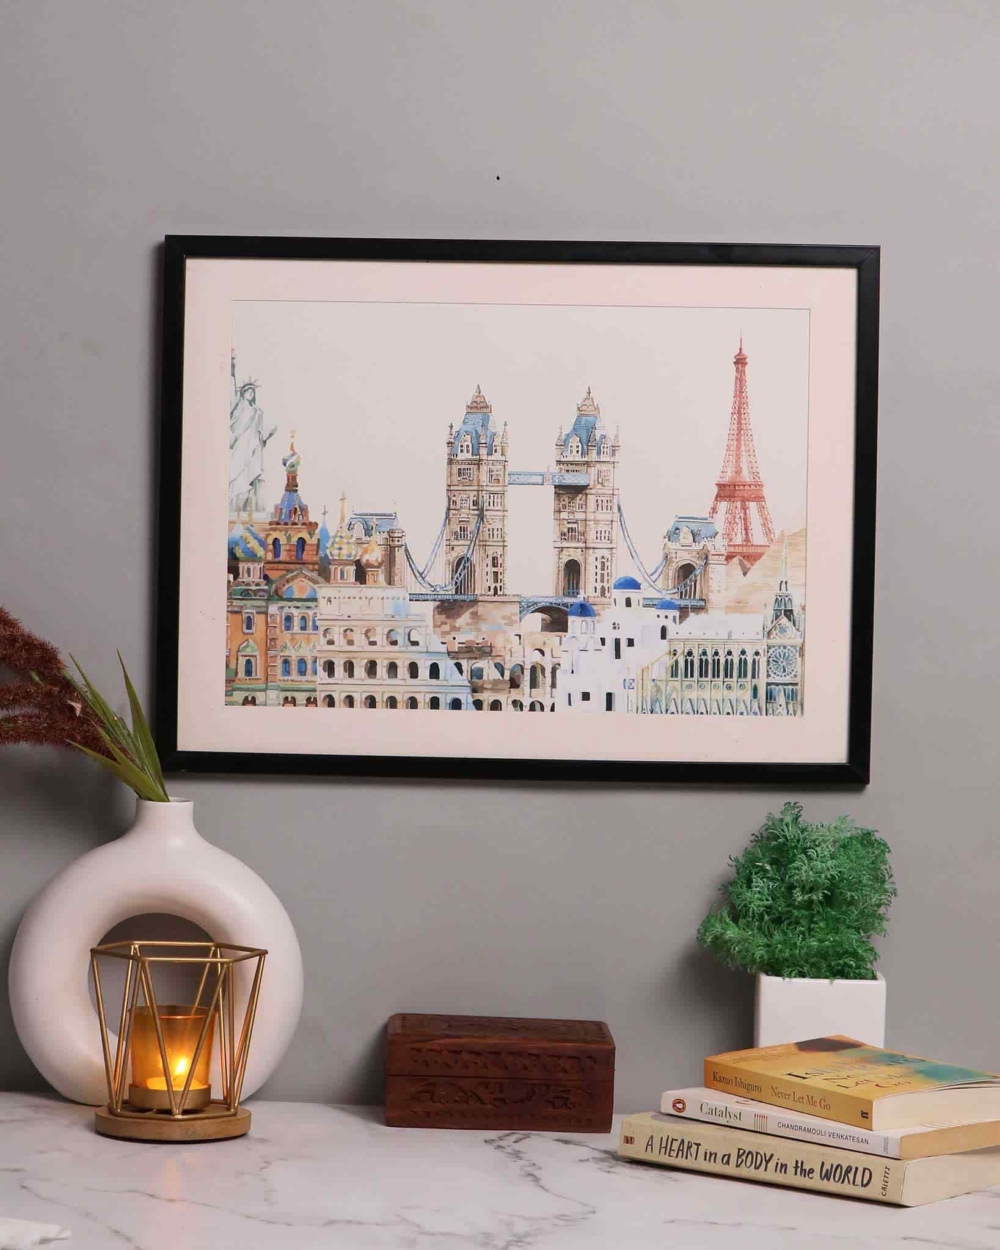 Historical place illustration wooden frame wall decor1